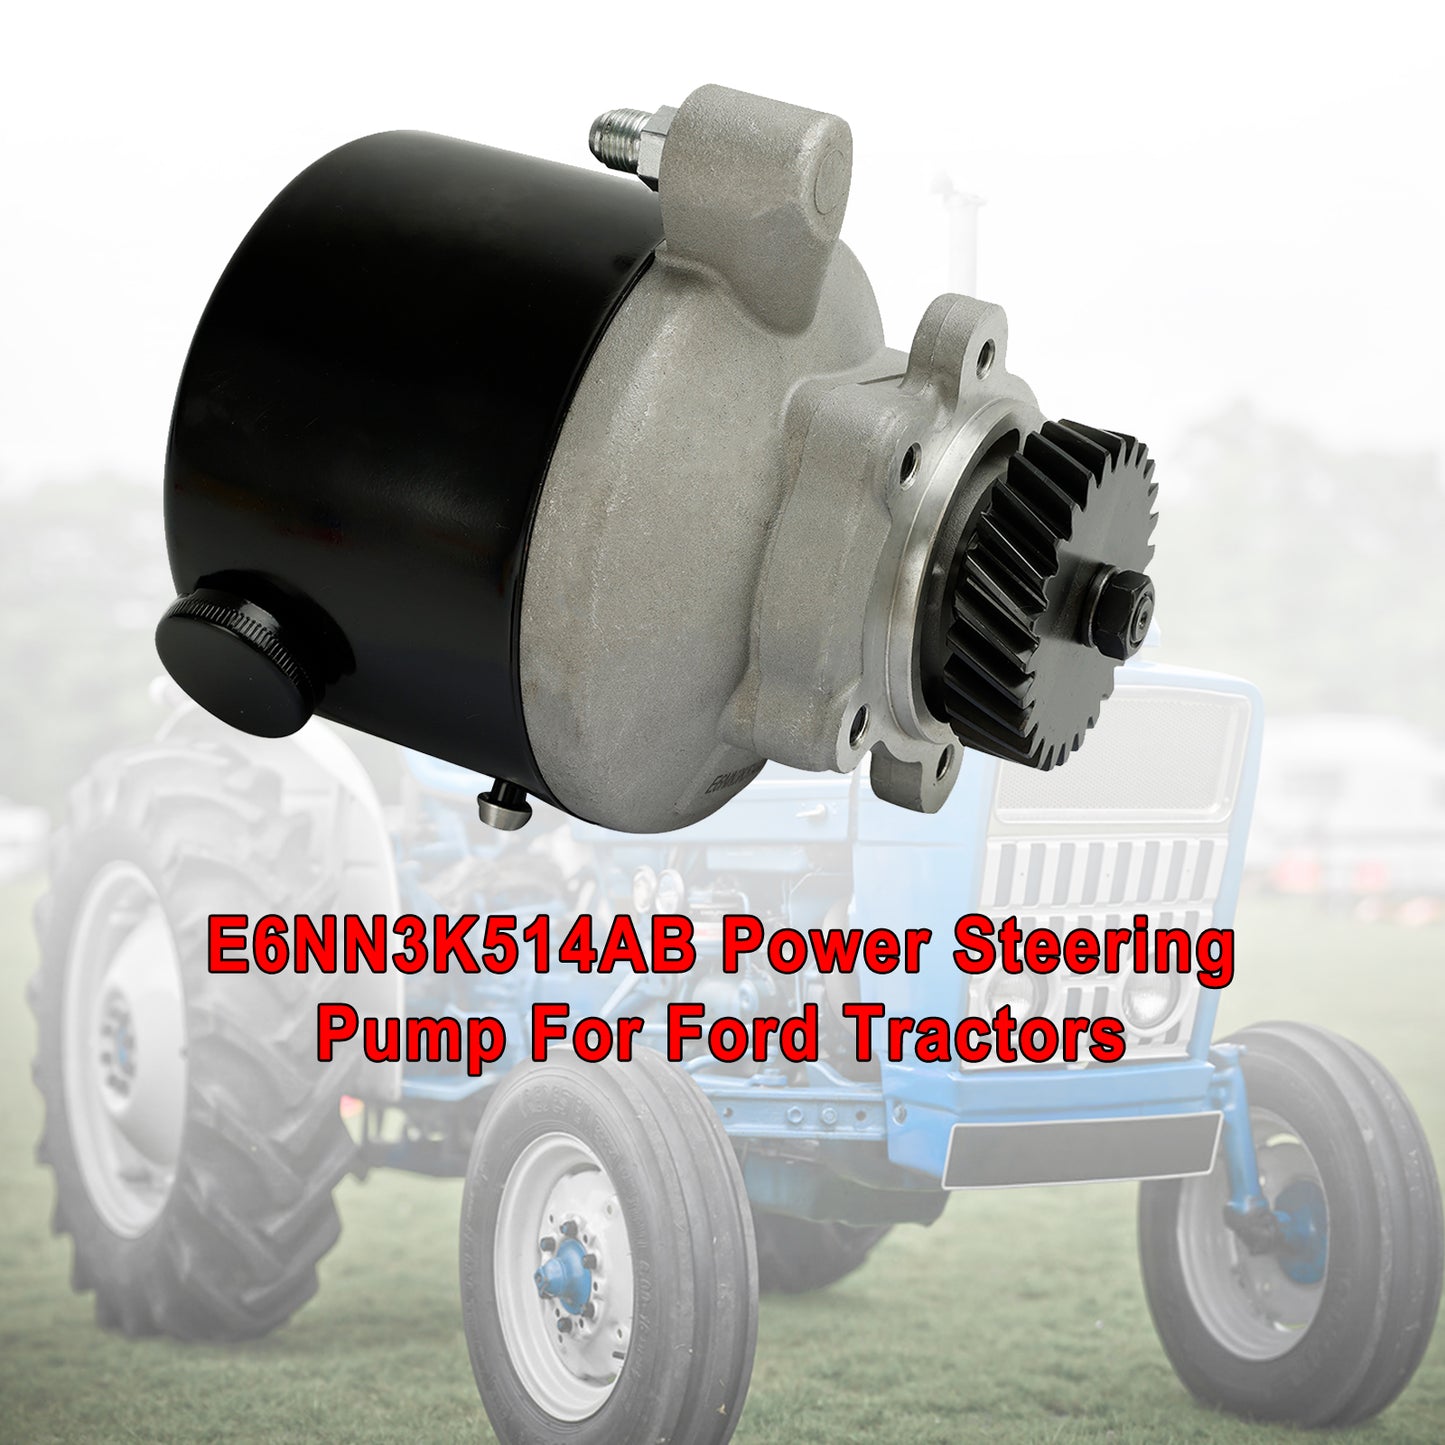 E6NN3K514AB Power Steering Pump For Ford Tractors 5110 5610 6610 7610 Generic